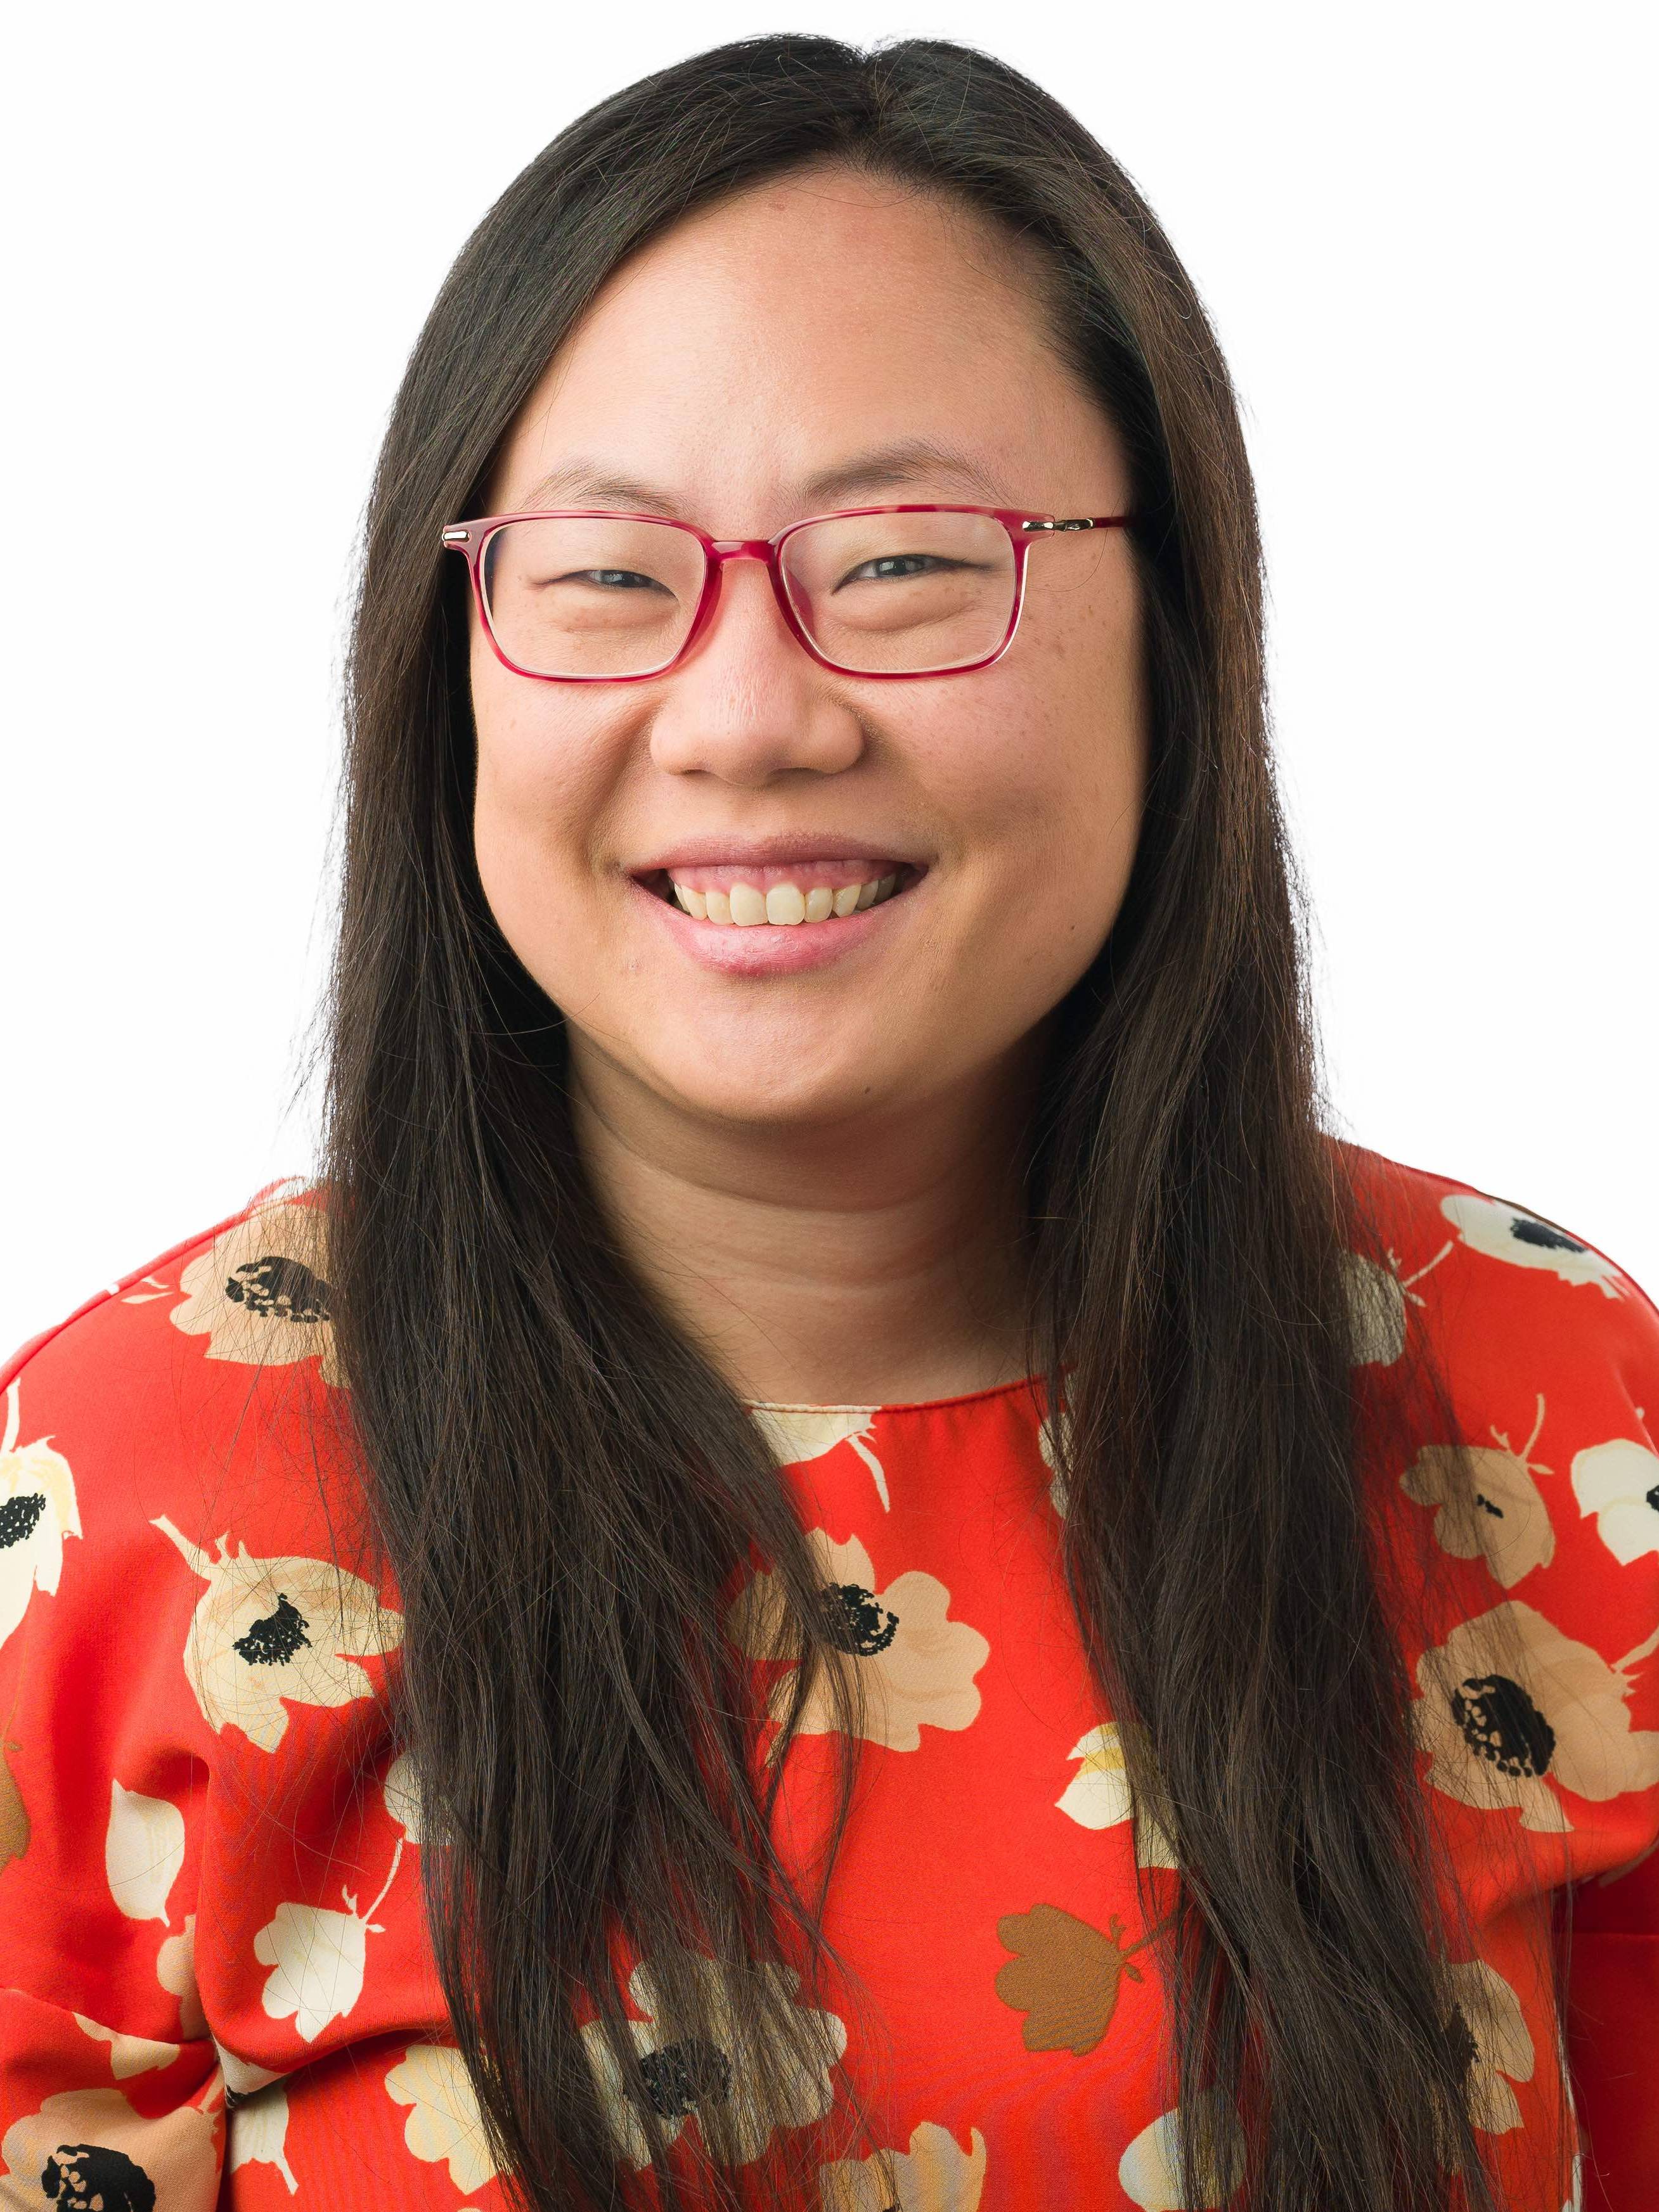 Smiling chinese woman with long brown hair wearing red framed glasses and a red blouse with big white flowers